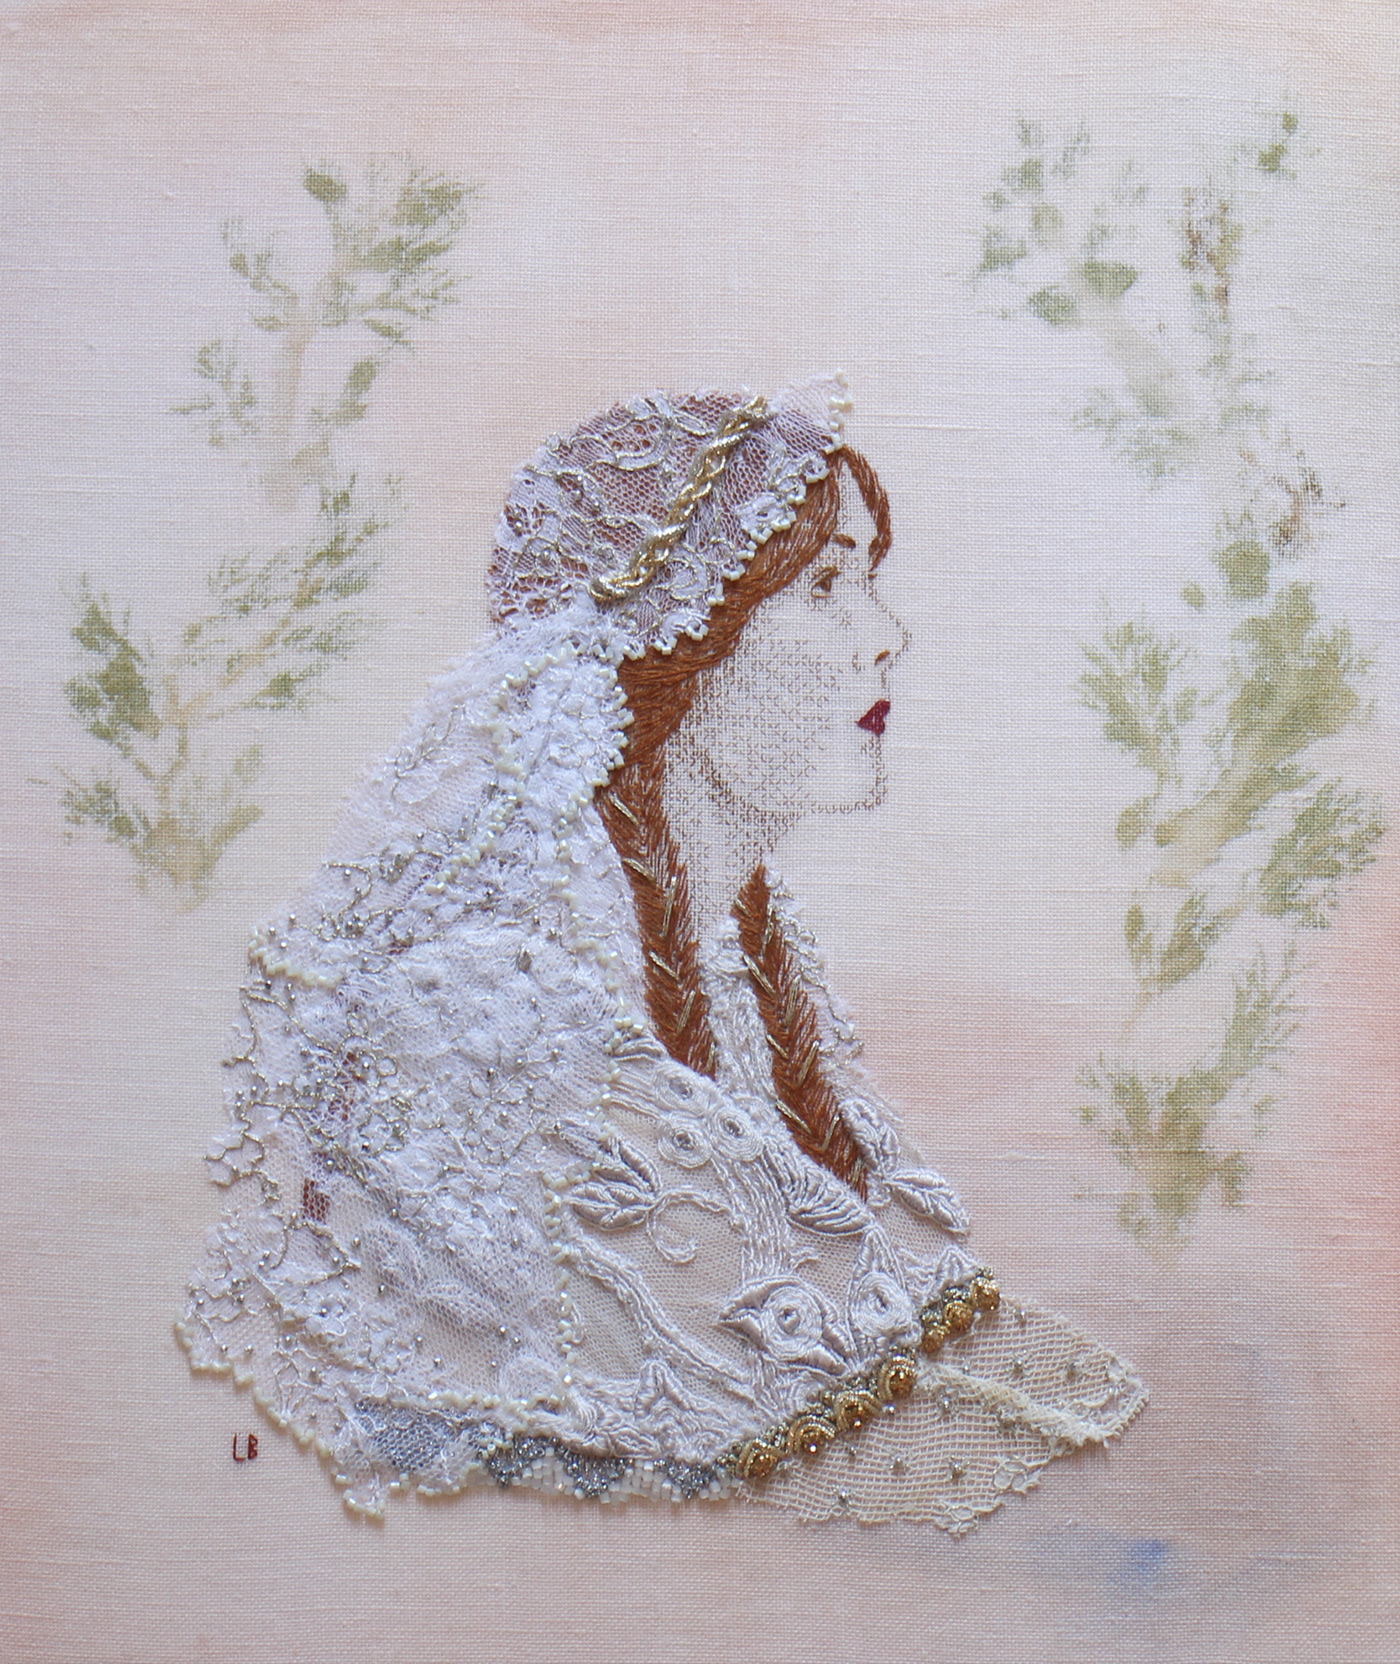 Embroidery hand embroidery textile art portrait bride art Needlework thread painting sewing art art embroidery